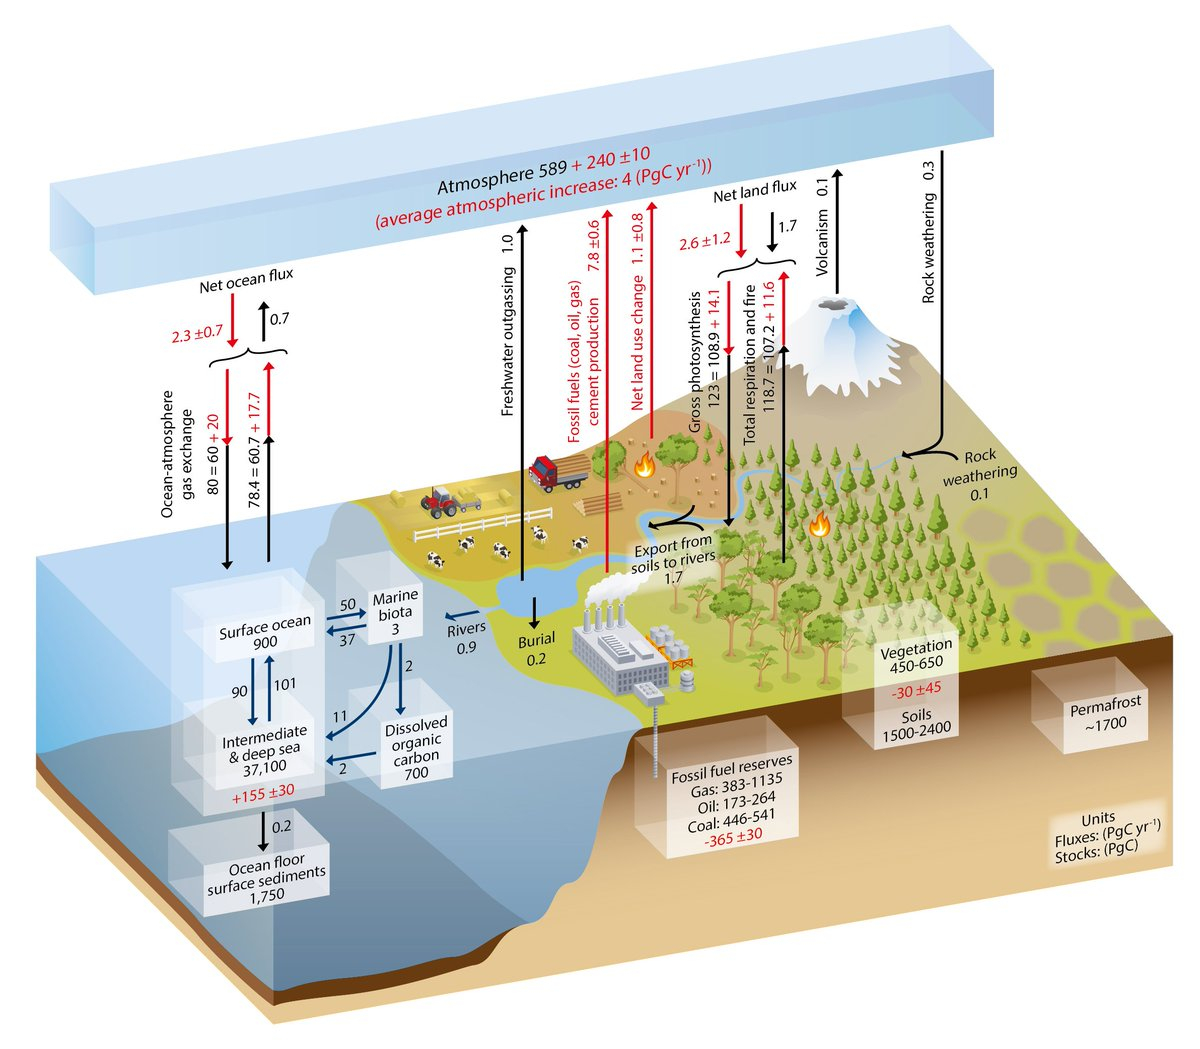 Carbon Cycle Diagram Robert Rohde On Twitter Because I Was Staring At It Today I Want